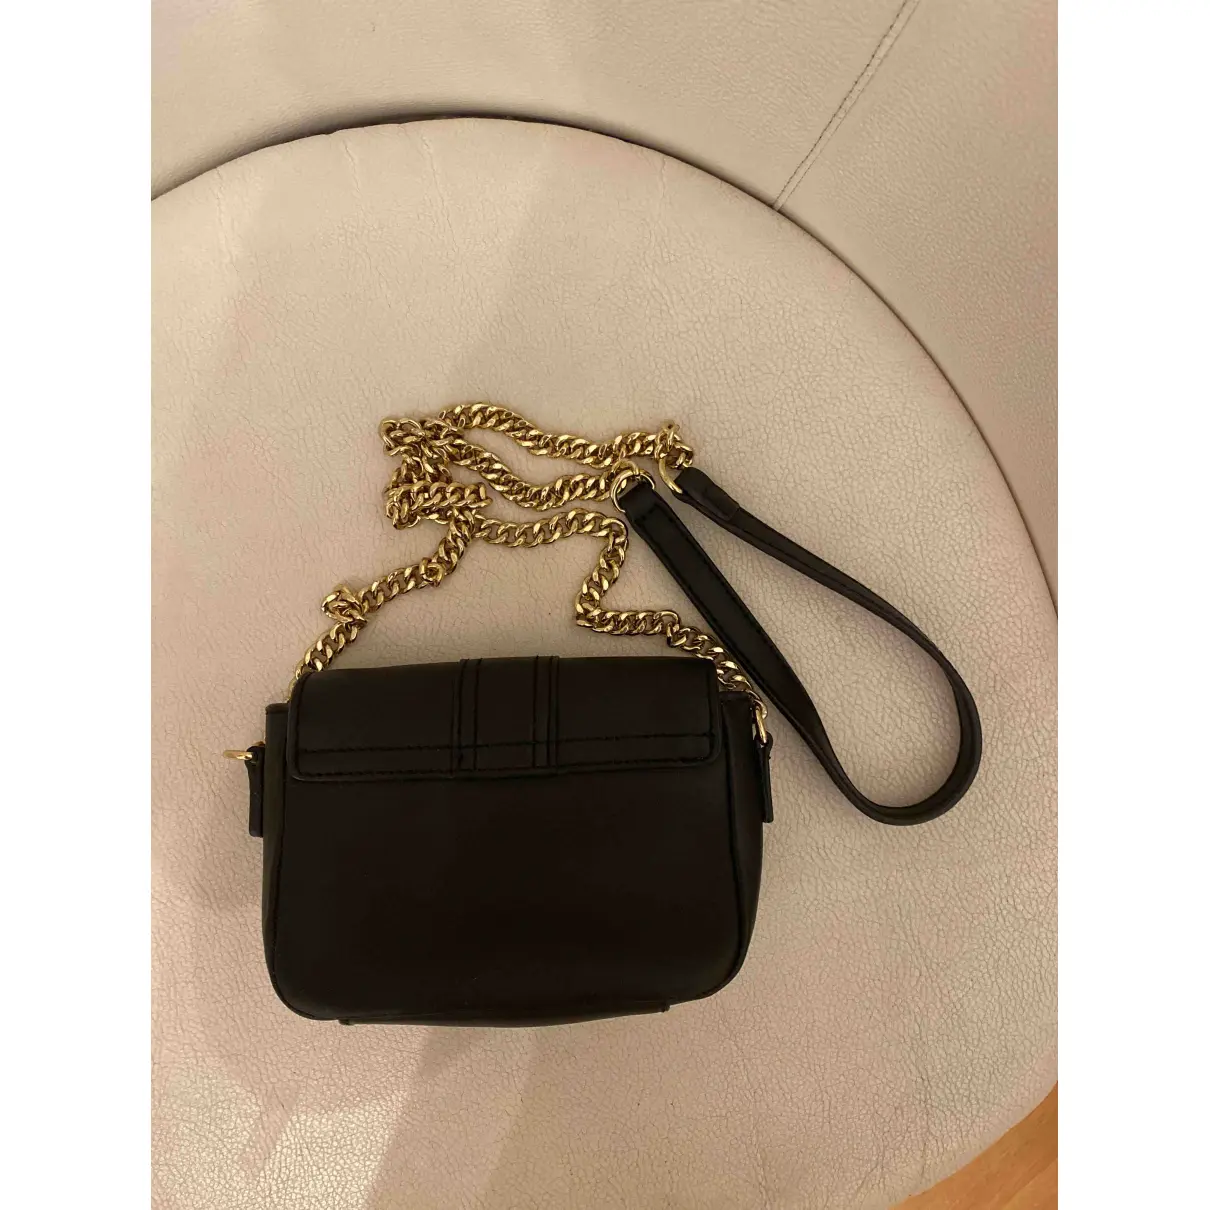 Buy Juicy Couture Leather mini bag online